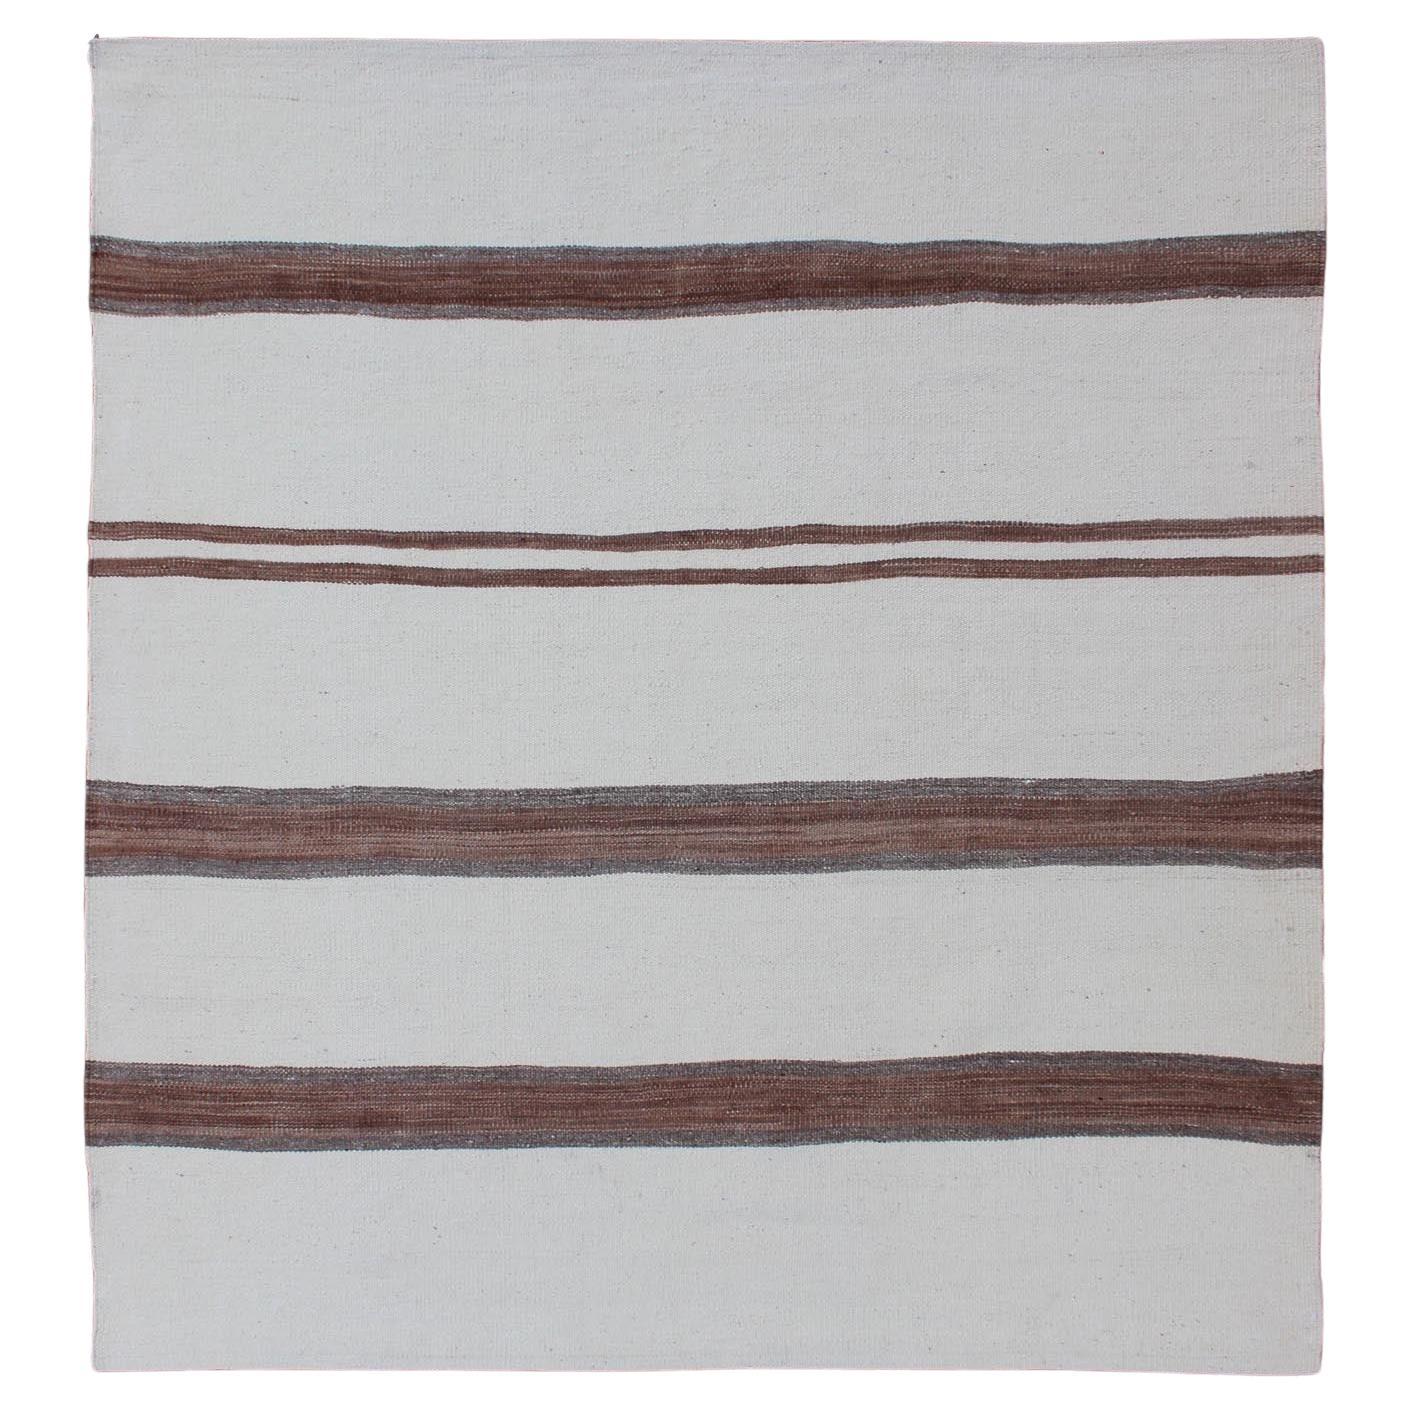 Turkish Vintage Kilim Flat-Weave Rug in Off White, Brown with Stripe Design For Sale